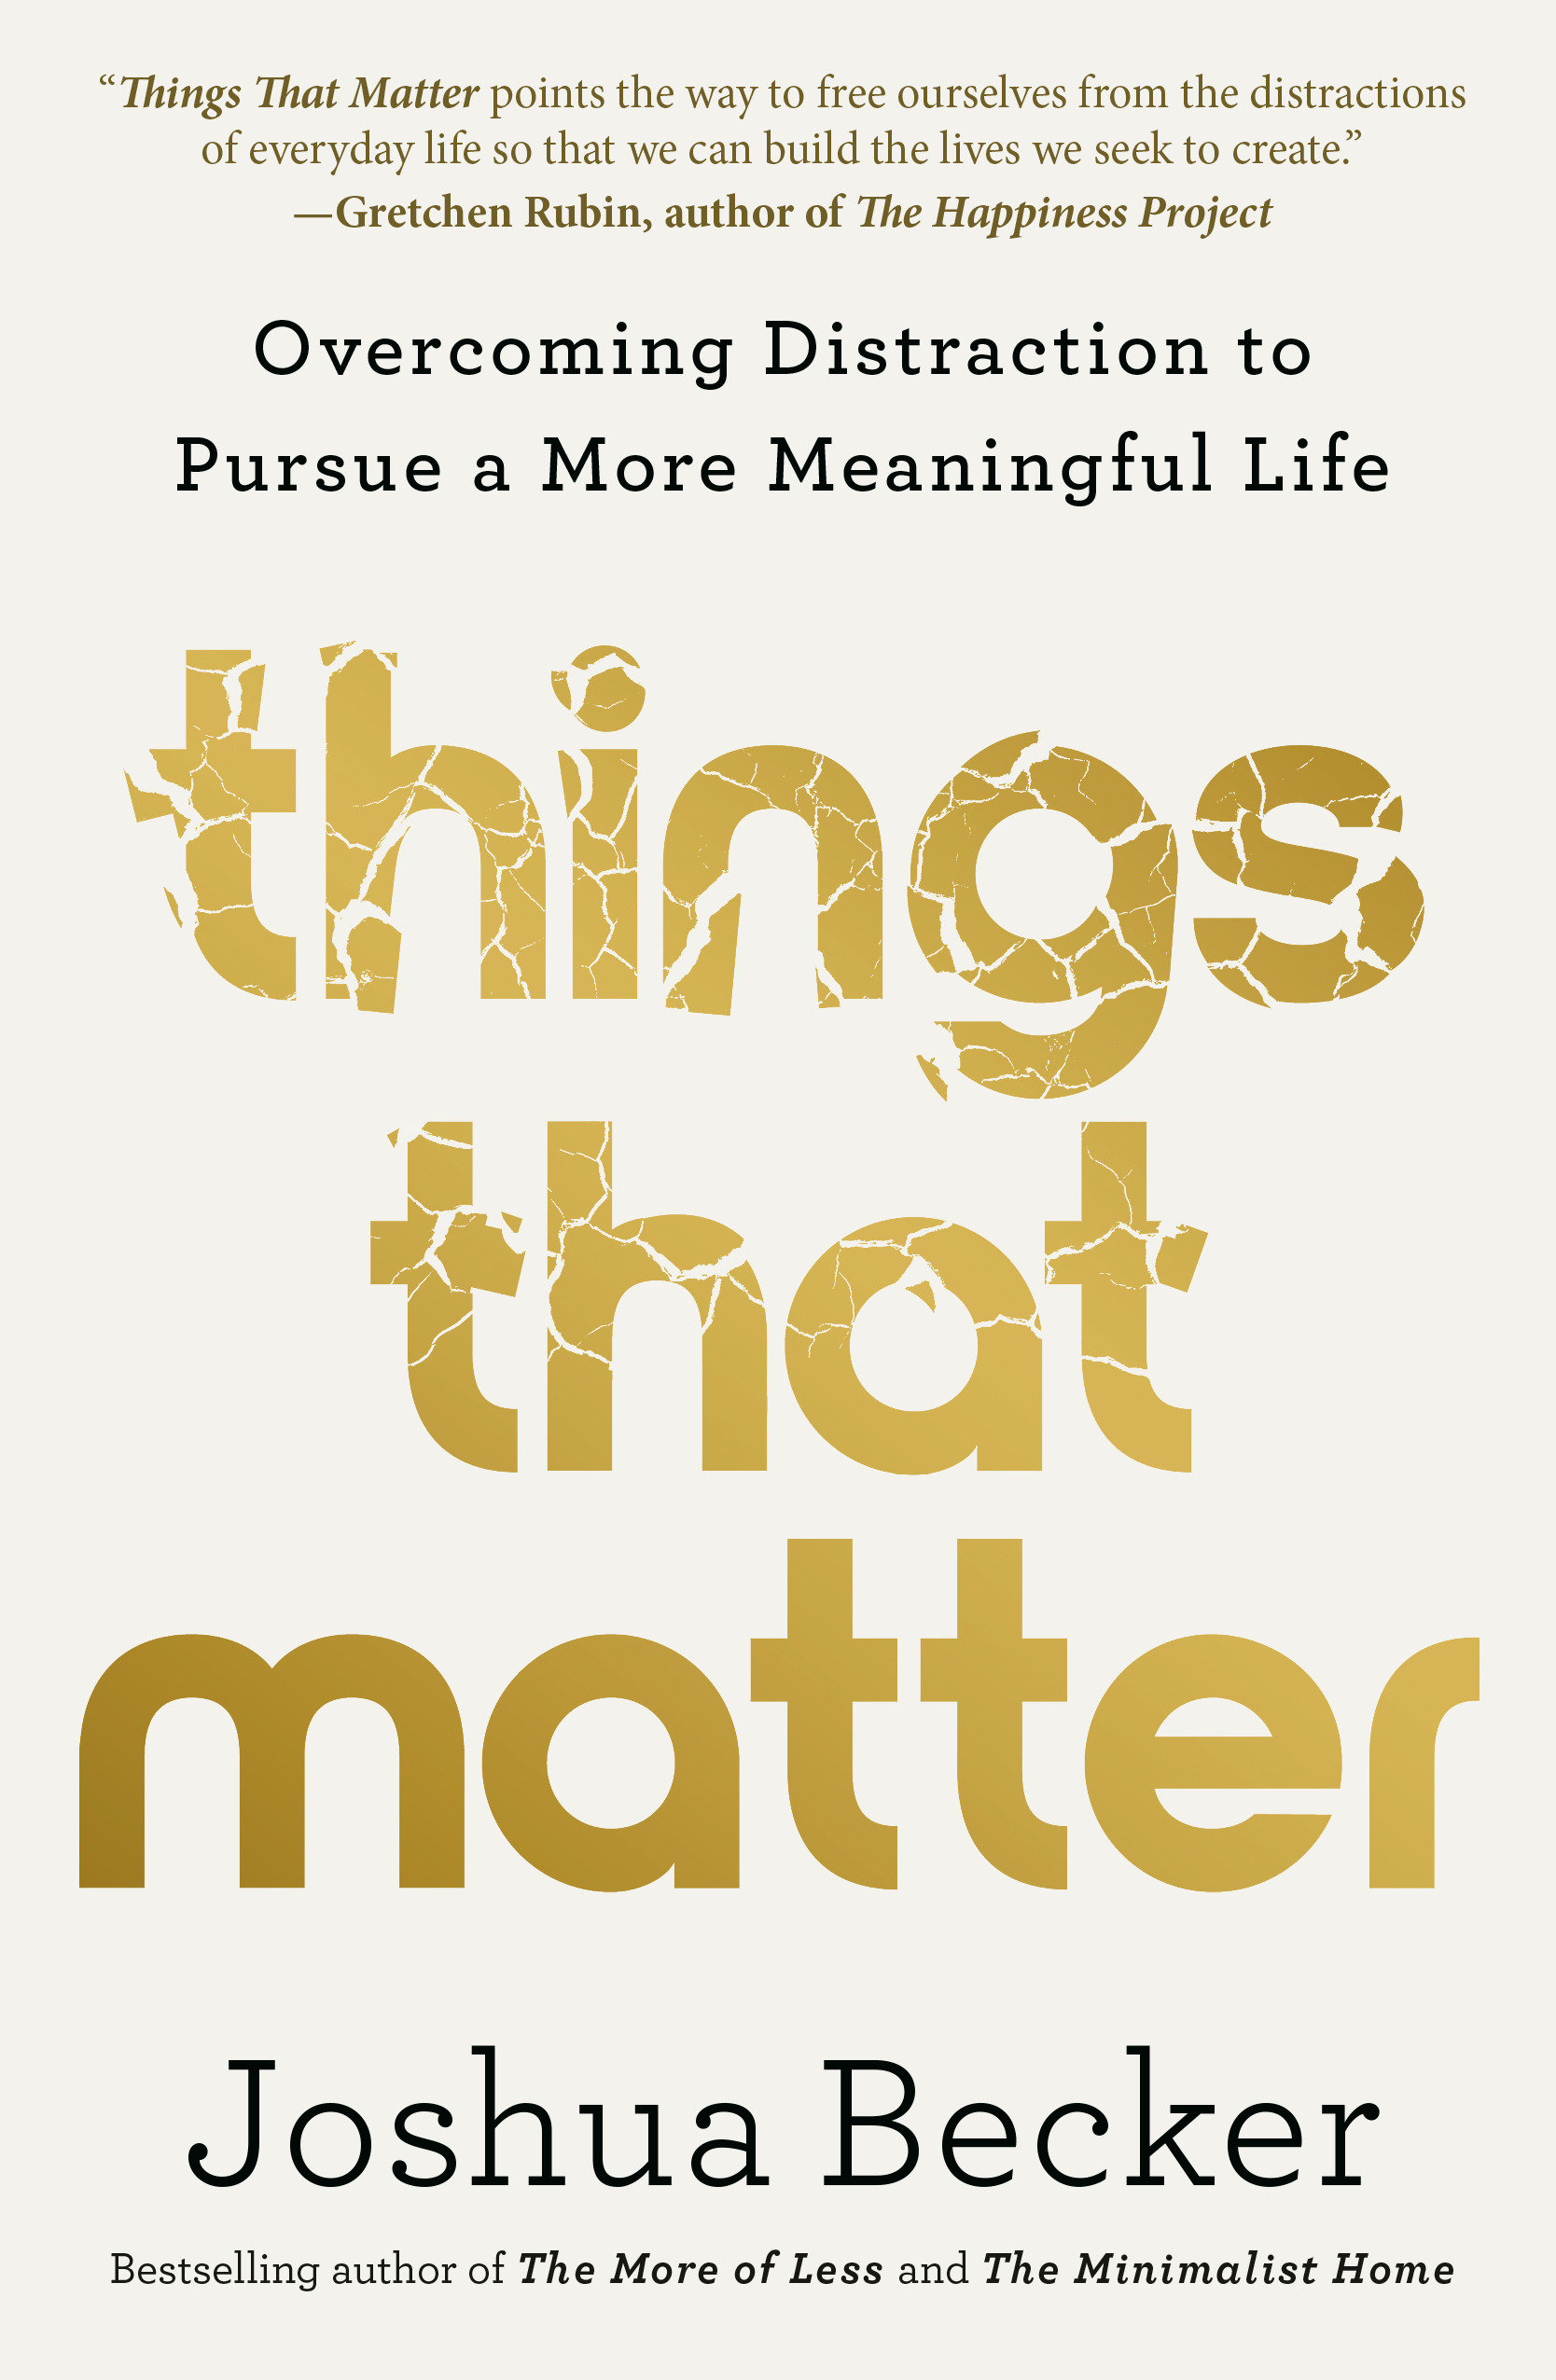 Things That Matter (Hardcover Book)